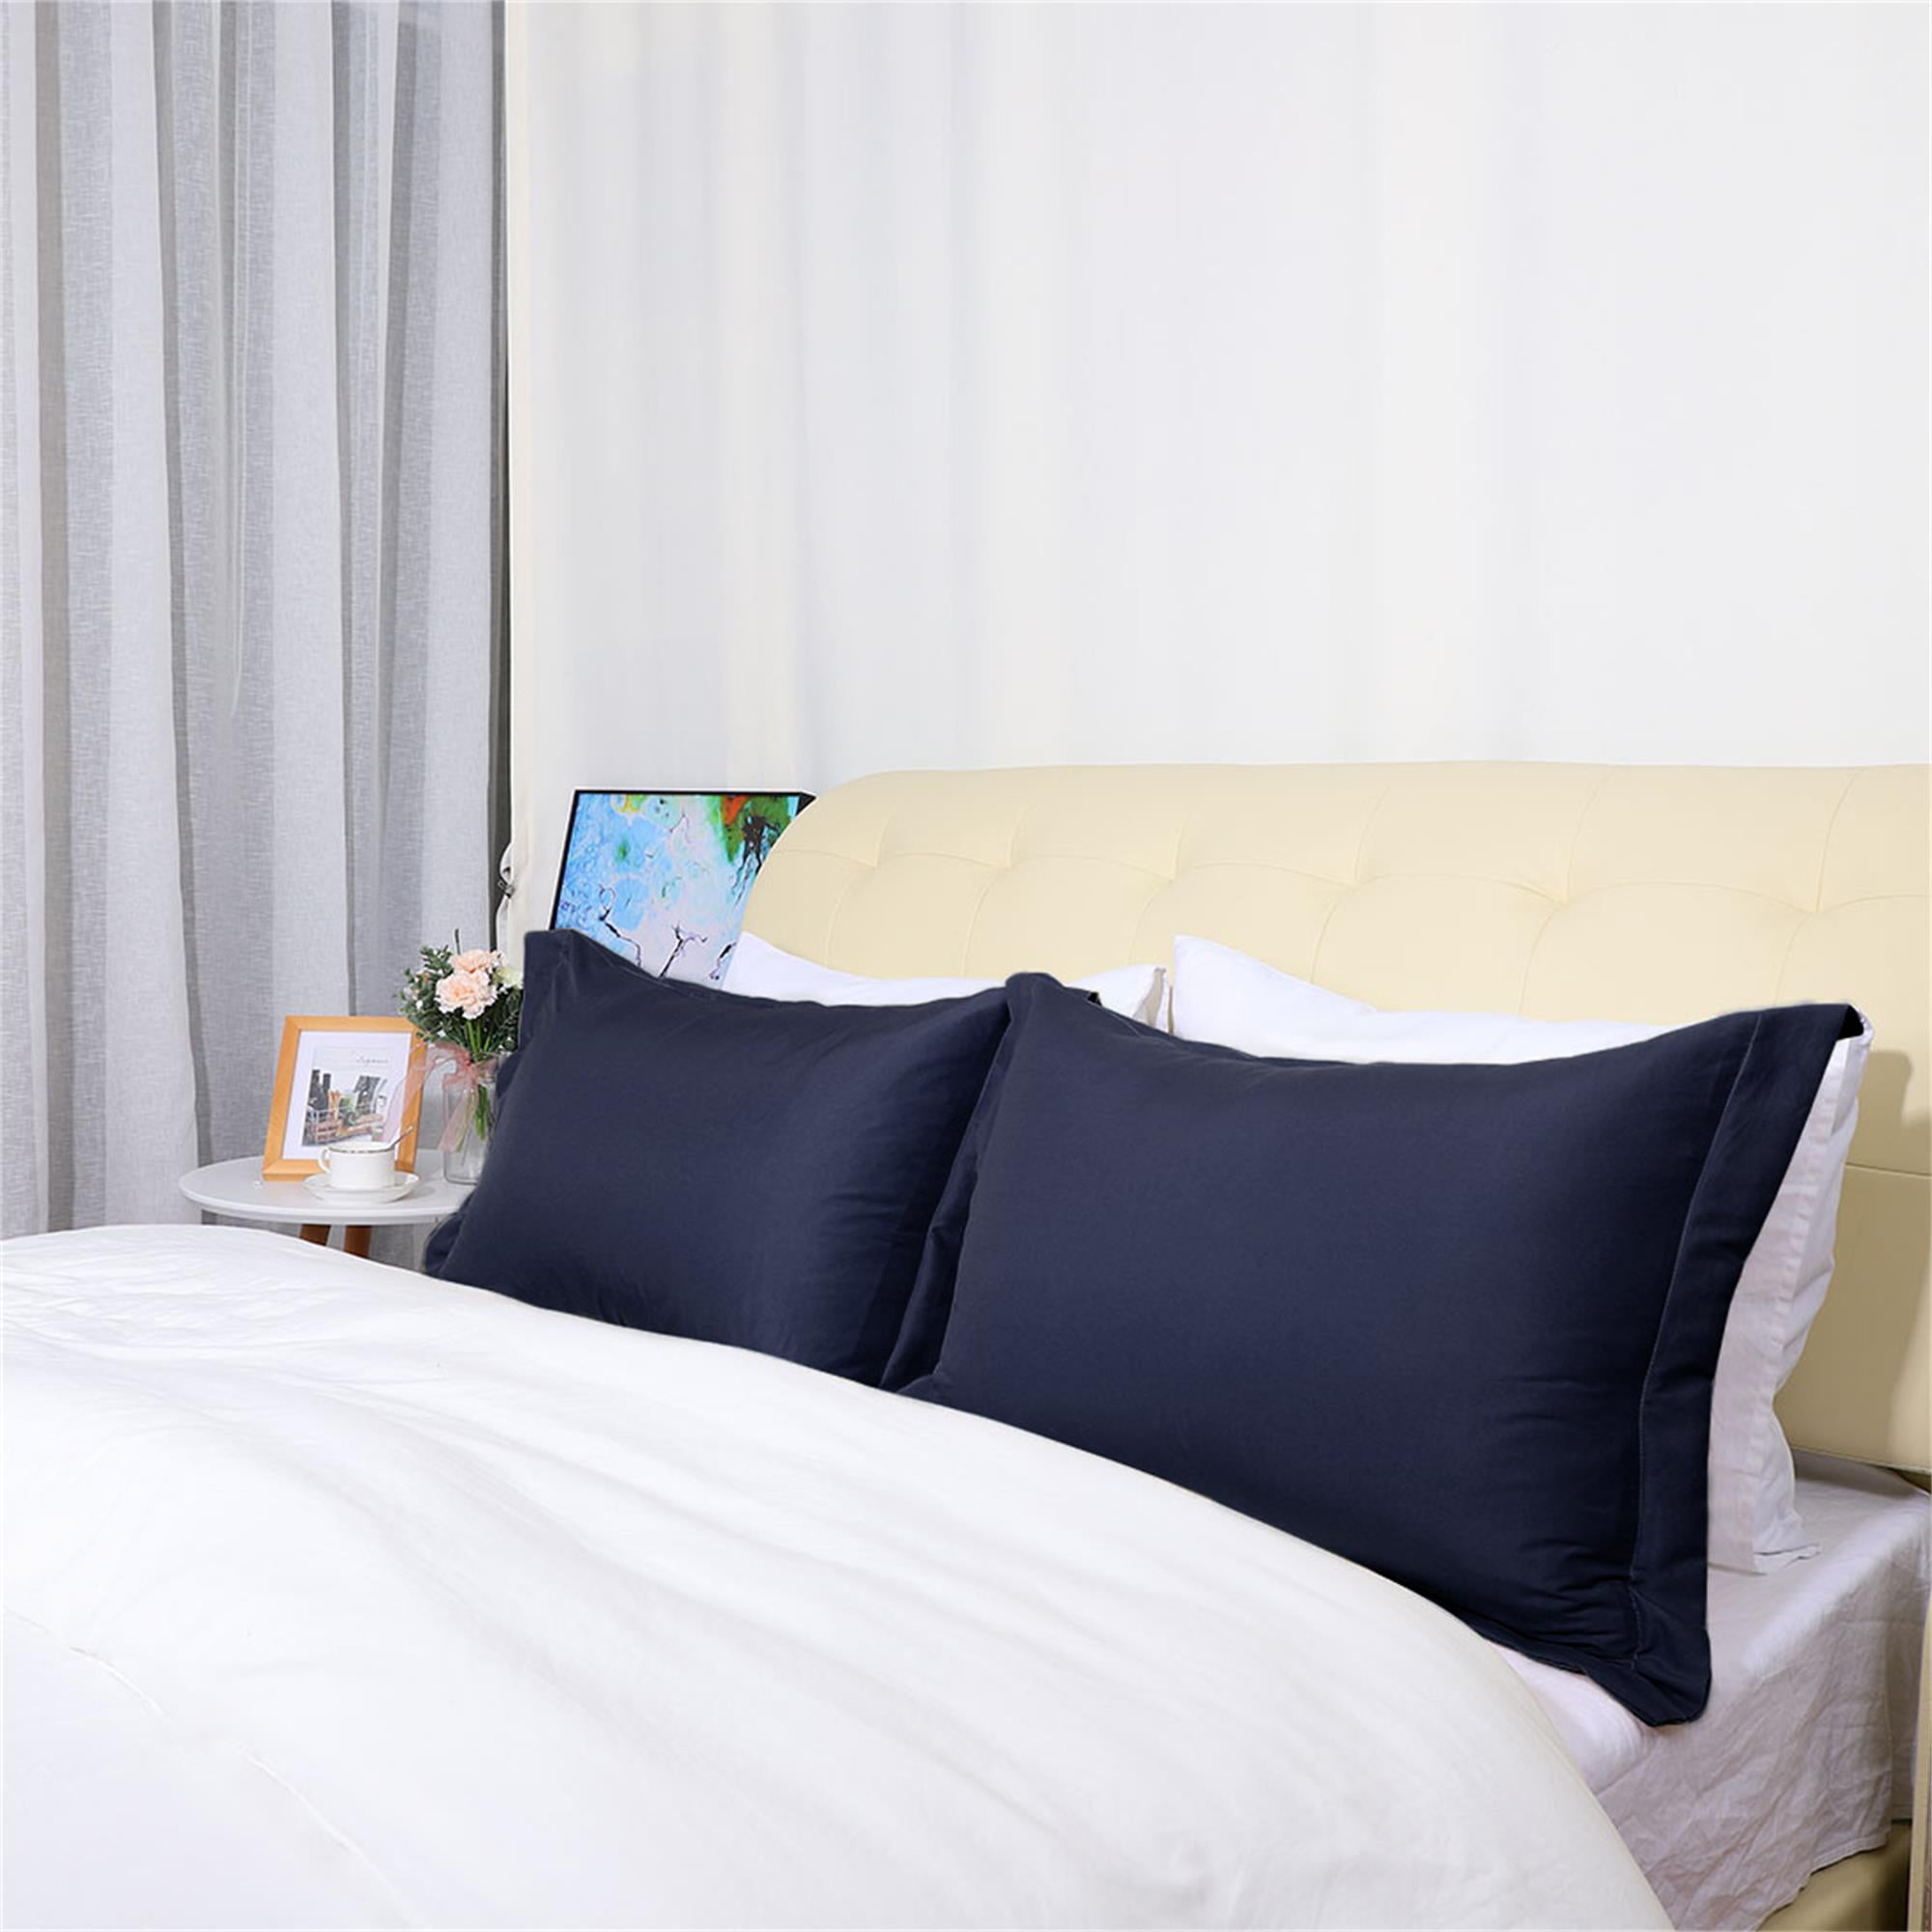 Details about   Printed Pillow Shams Set of 2 Pillowcase Brushed Microfiber Soft Bedroom Decor 